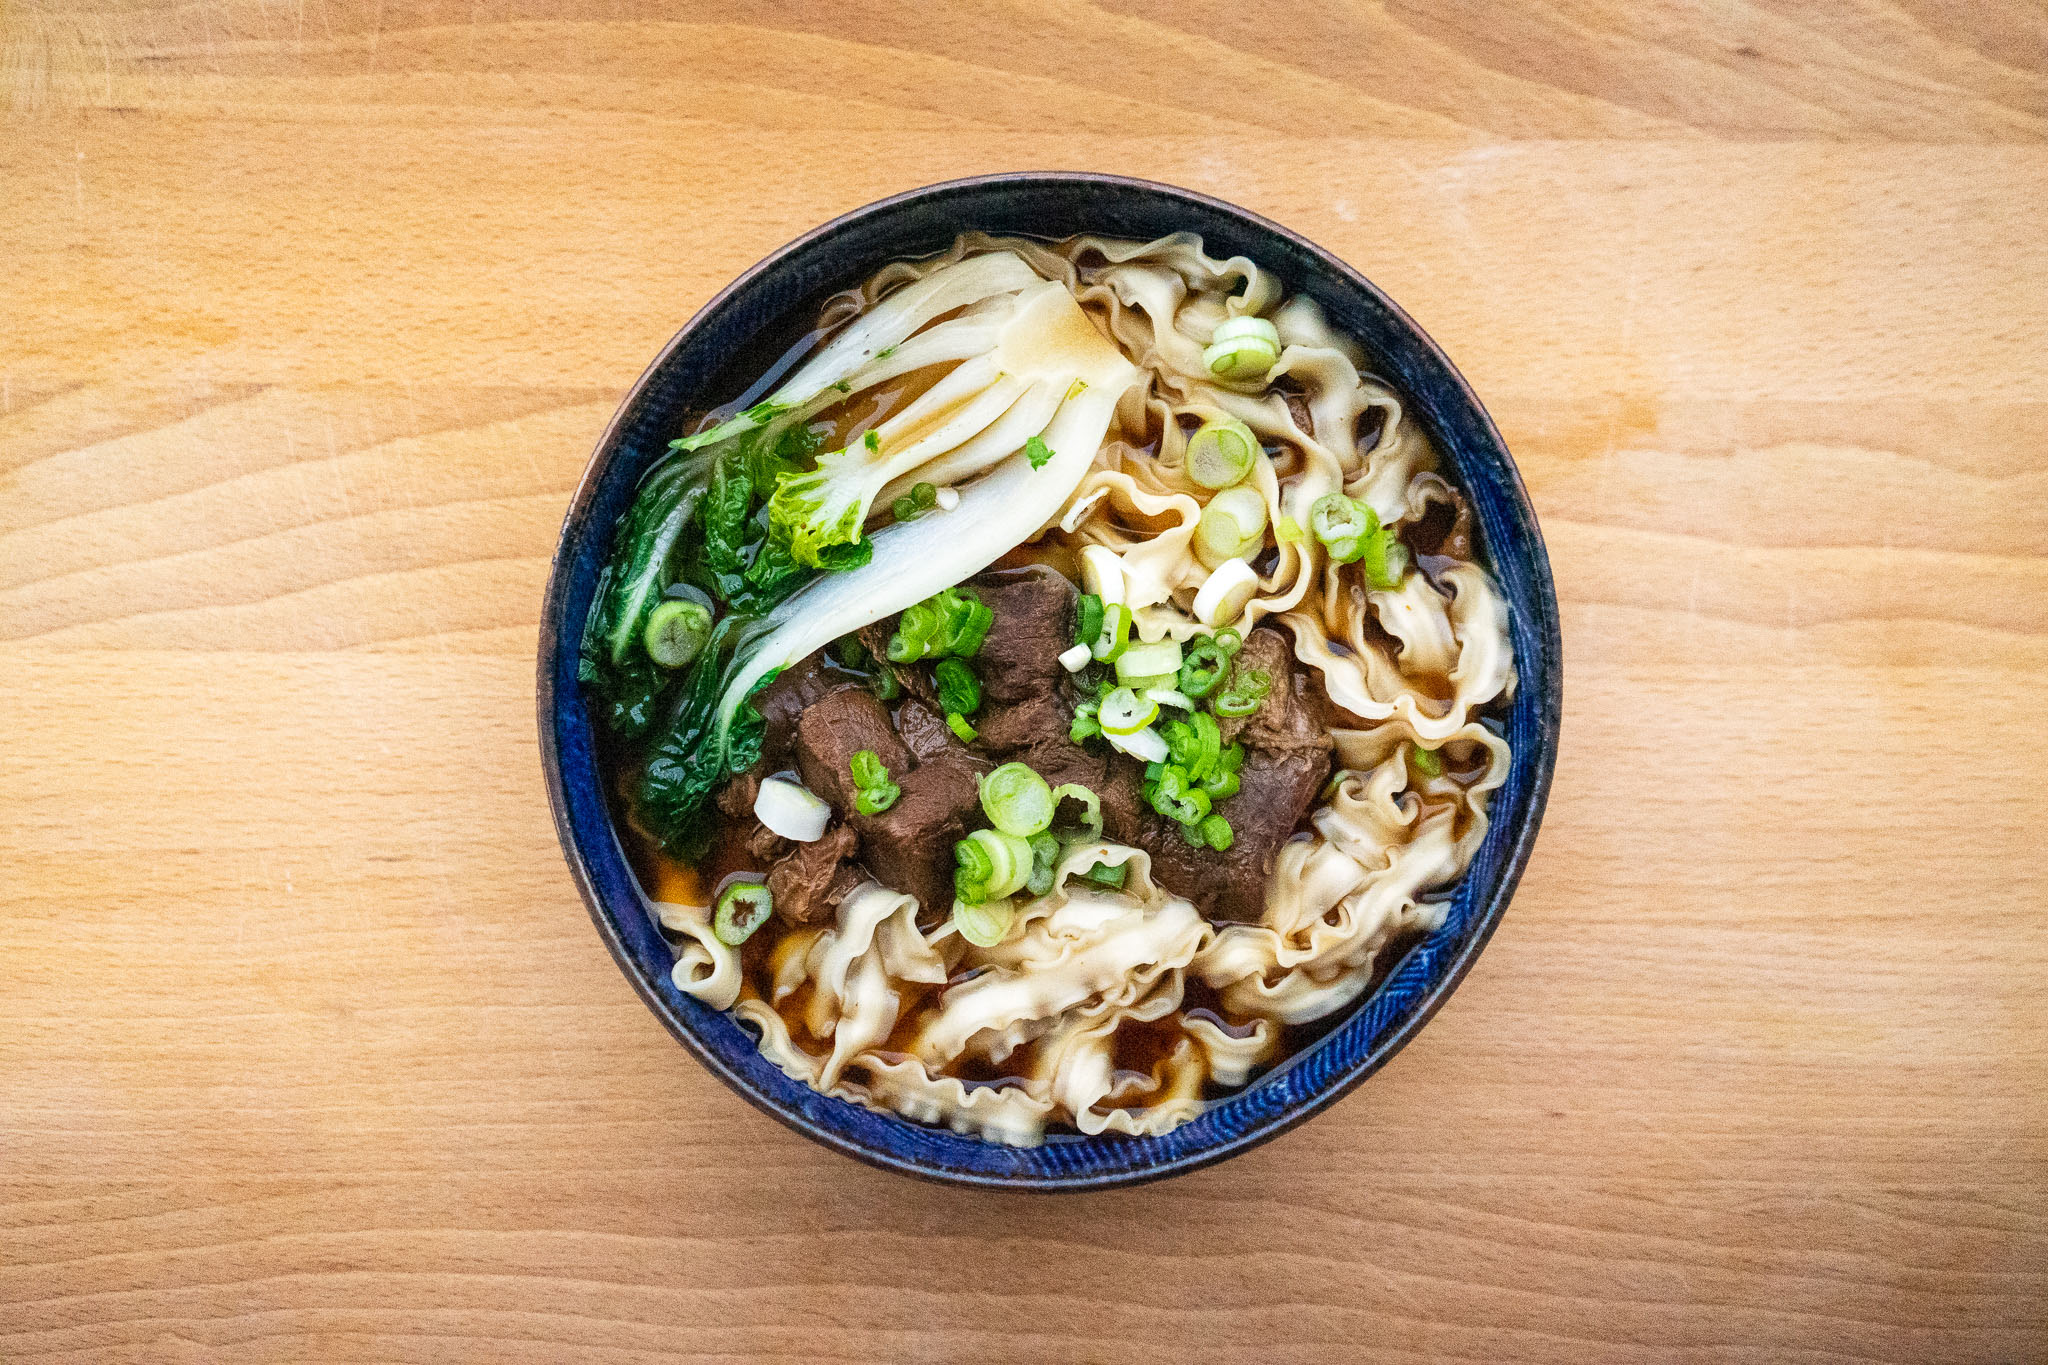 Overhead view of a bowl of beef noodle soup, garnished with bok choy and chopped scallions, on a wood table.